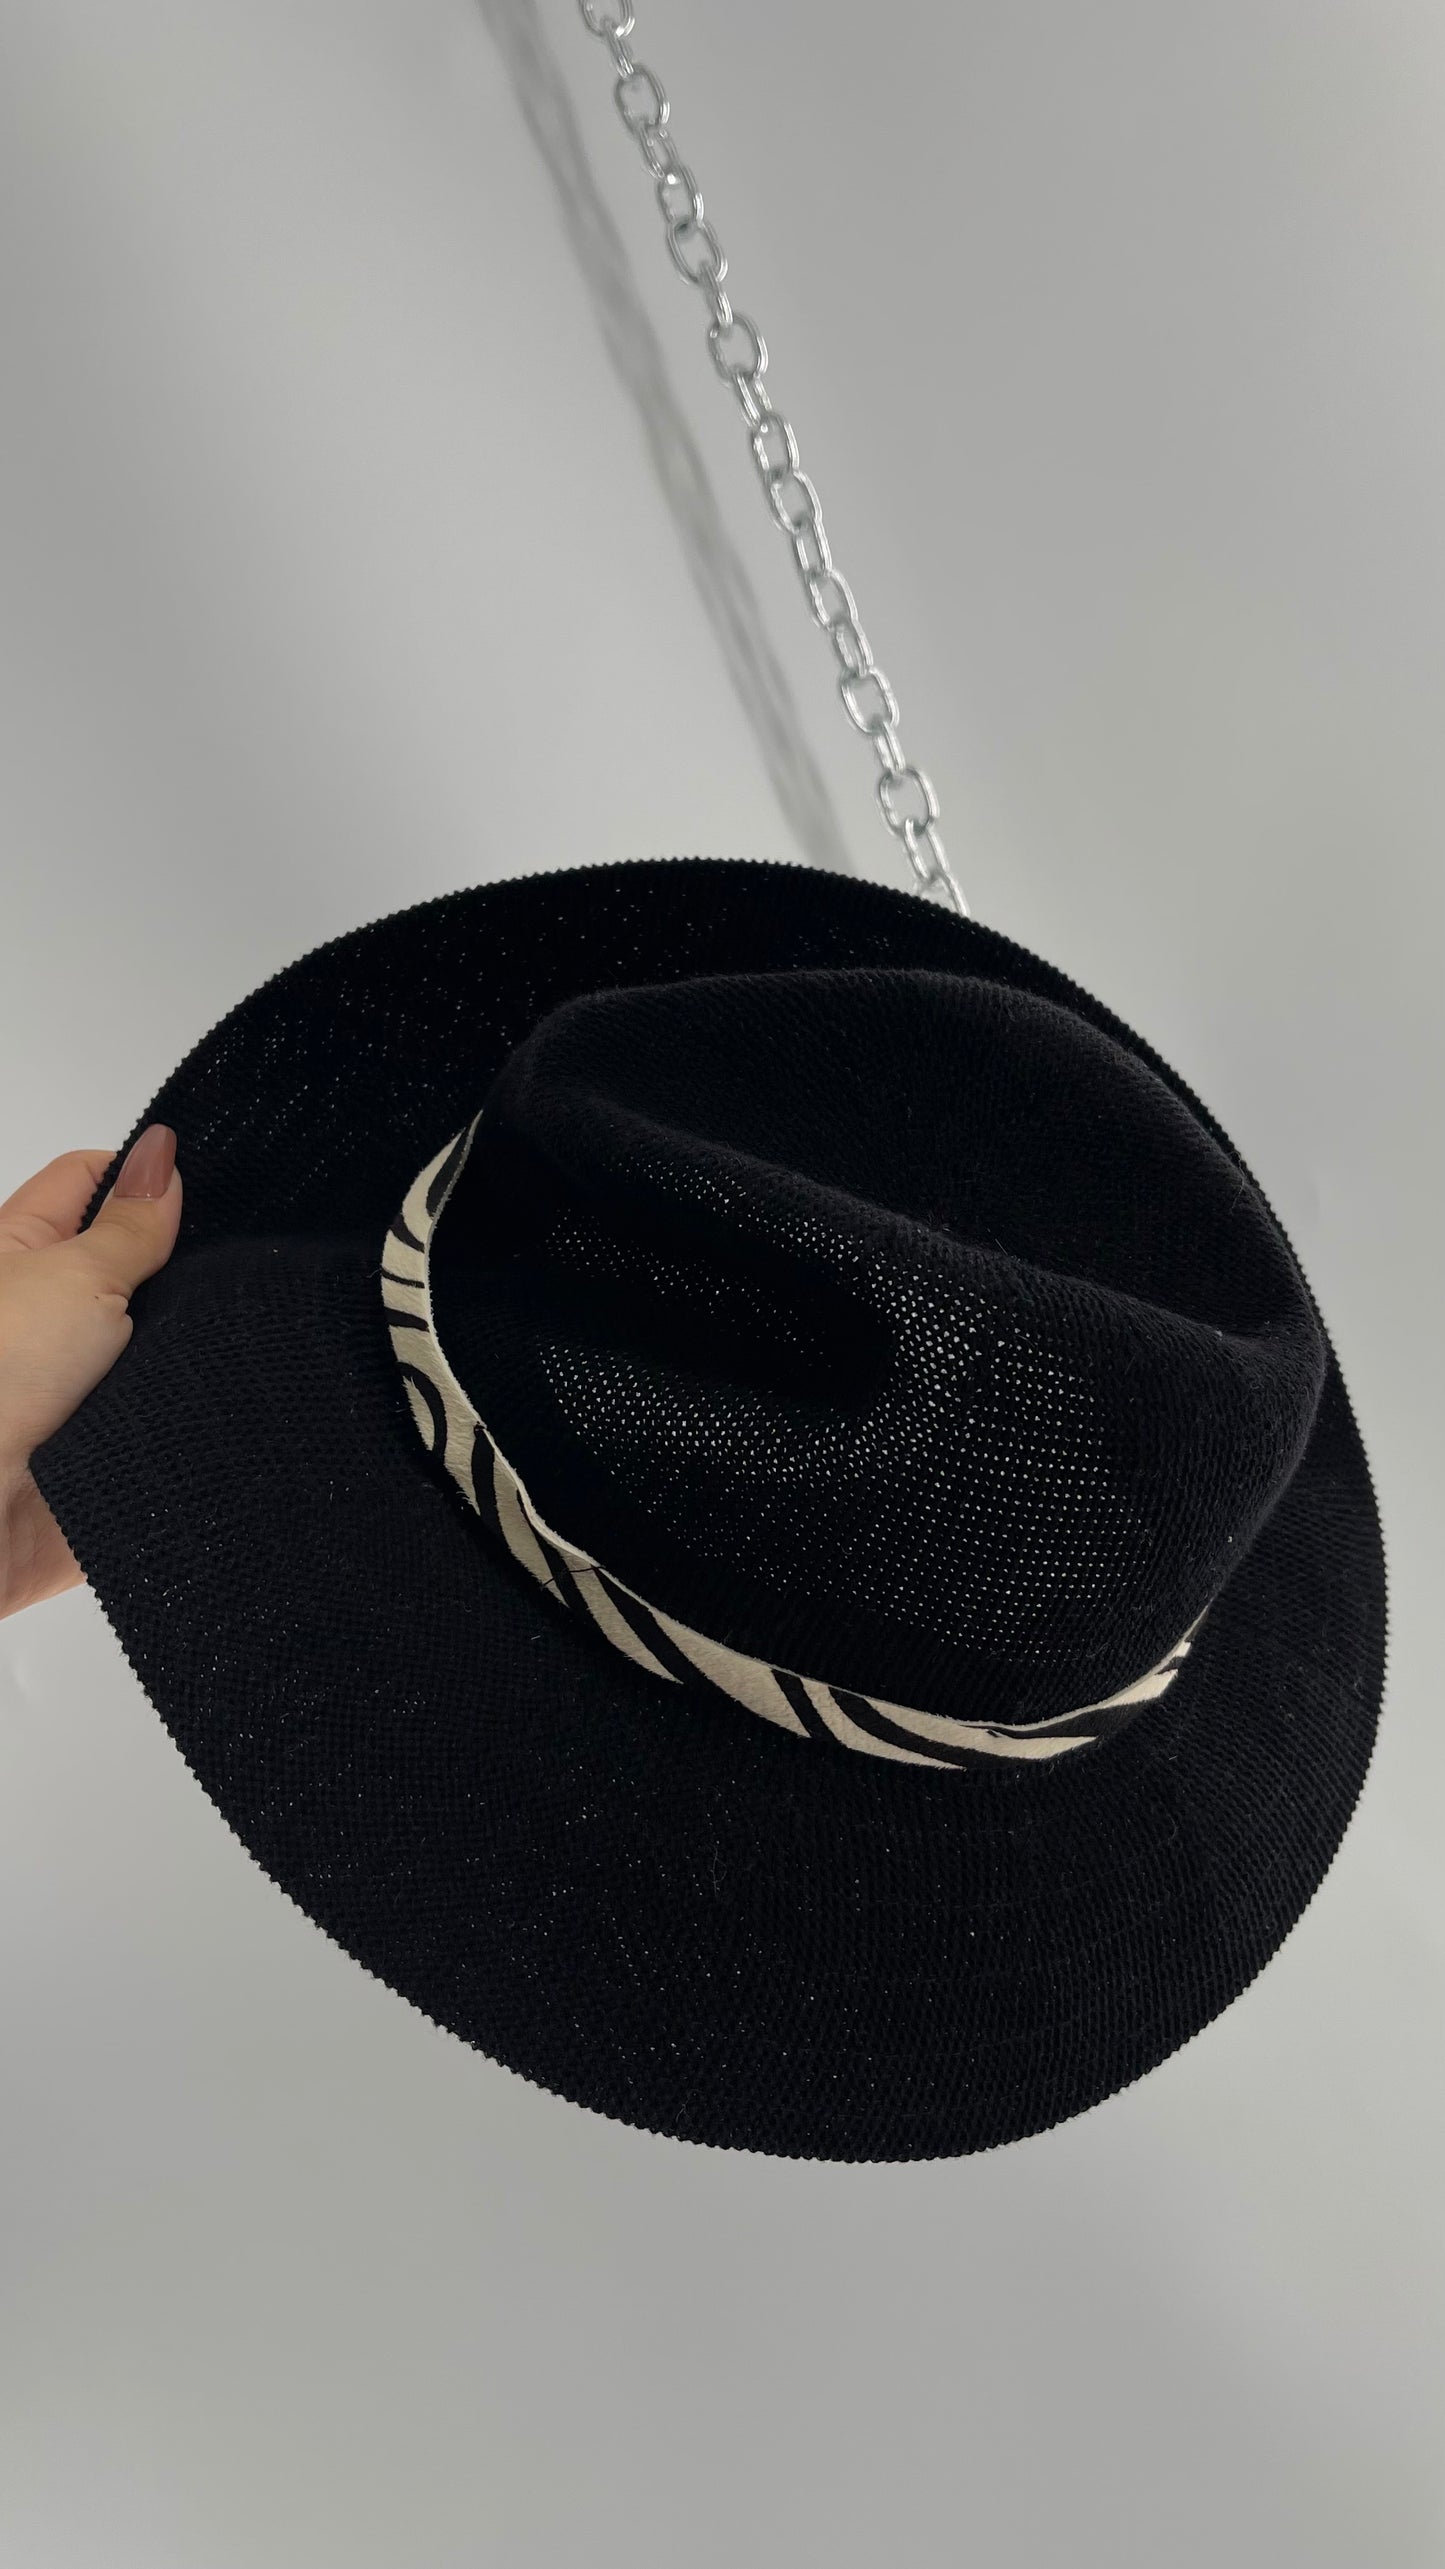 Free People Black 55% Cotton Woven Sun Hat with Textured Fur Belt